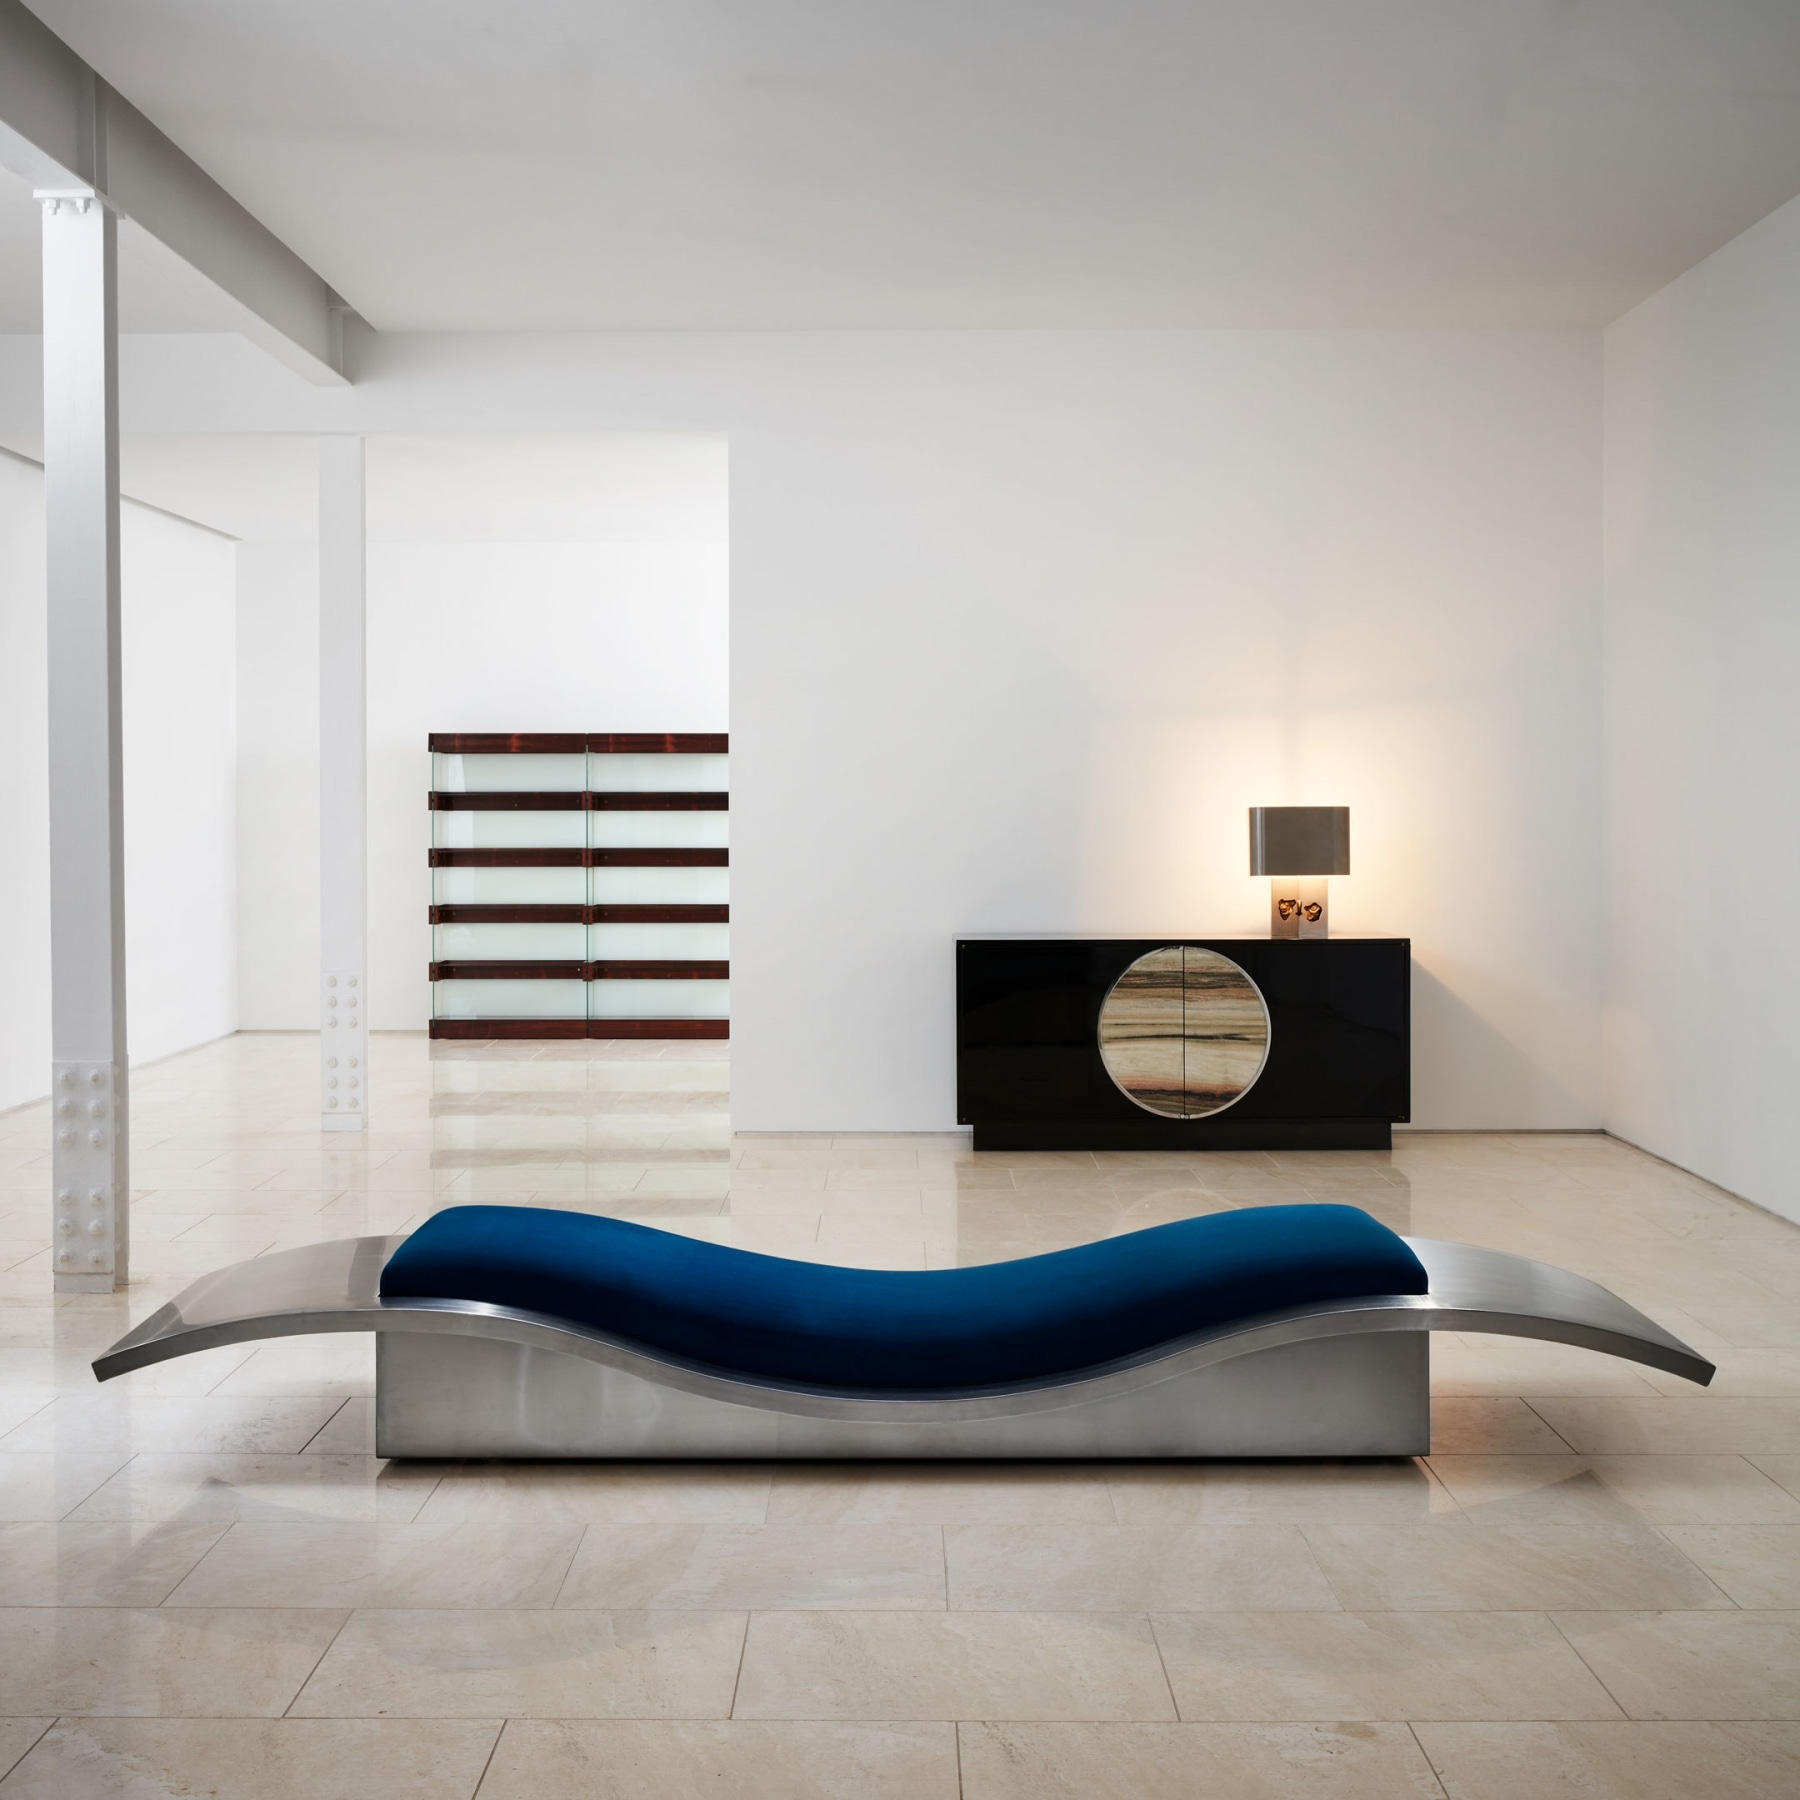 Shown with&nbsp;Maria Pergay&nbsp;Lit Tapis Volant / Flying Carpet Daybed, 1968&nbsp;and&nbsp;Table Lamp, 1970